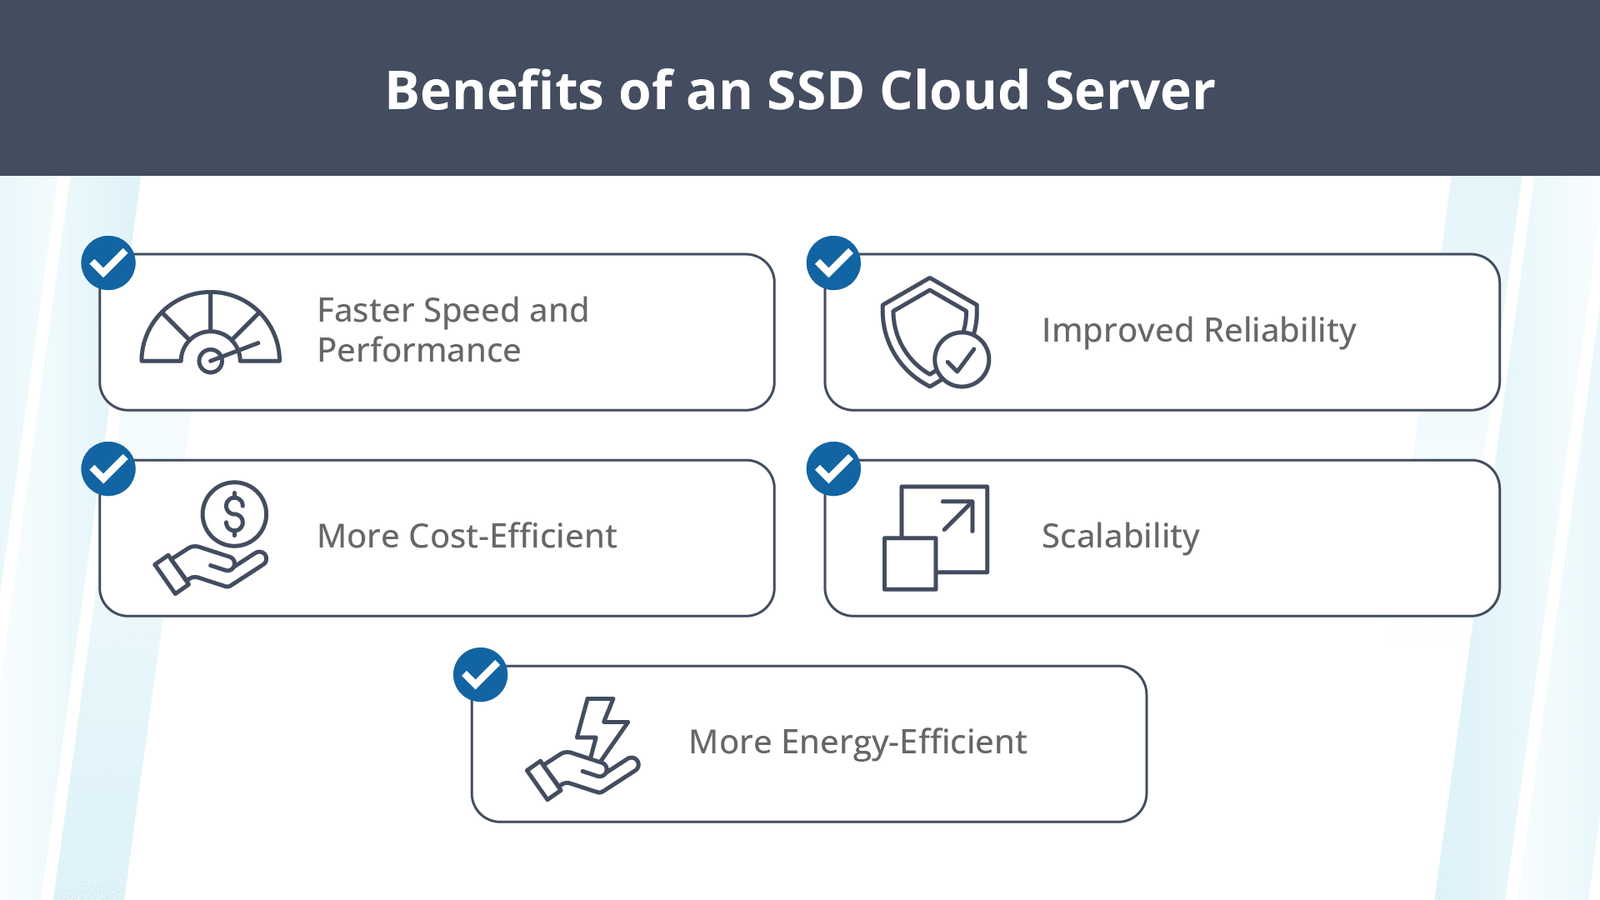 An SSD cloud server offers many benefits, including faster speed and performance.